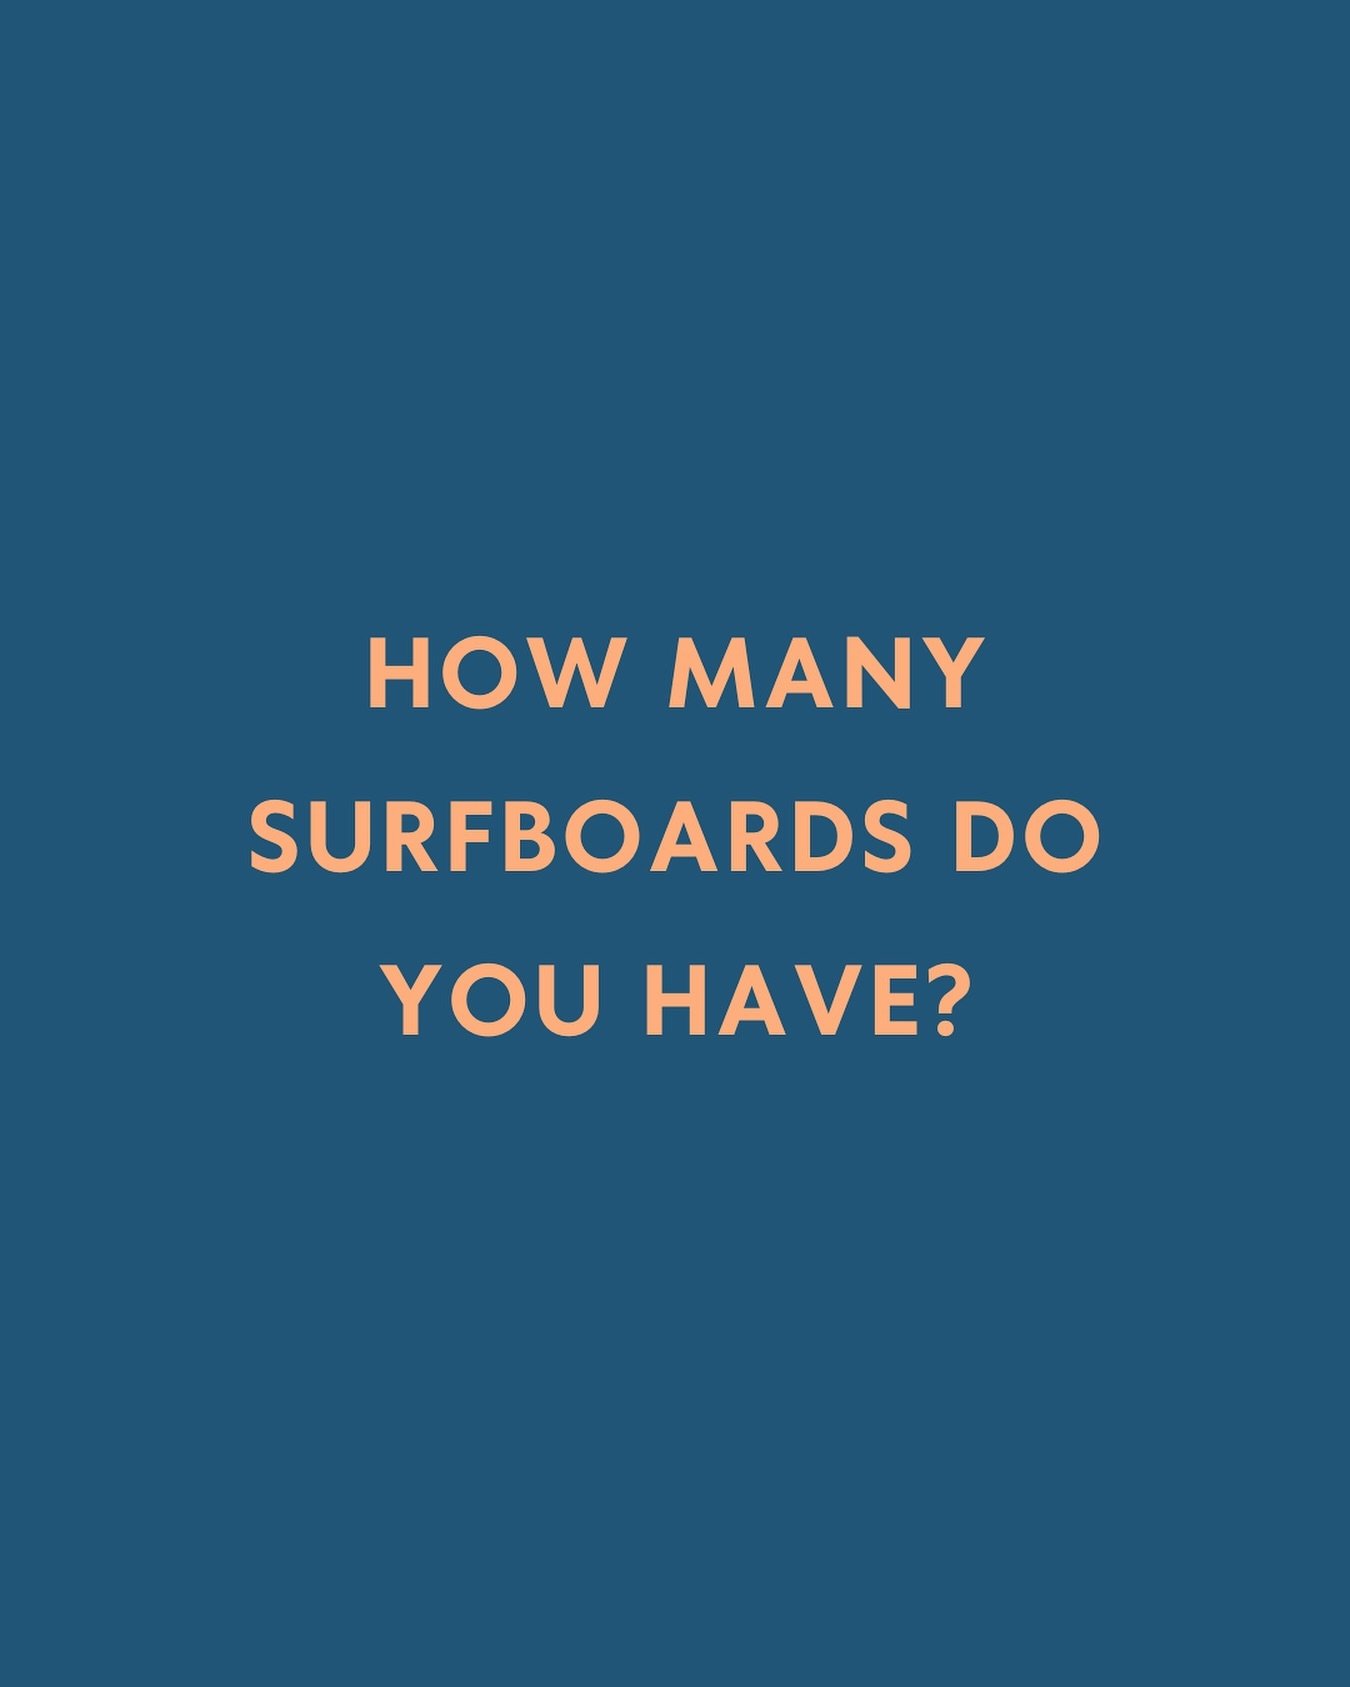 1, 2, 3, 4&hellip;?
Let us know in the comments. If you have more than one surfboard, do you surf them all or are some of them collecting dust?

#sulasurfbali #surflessonsbali #surftripsbali #exploreindonesia